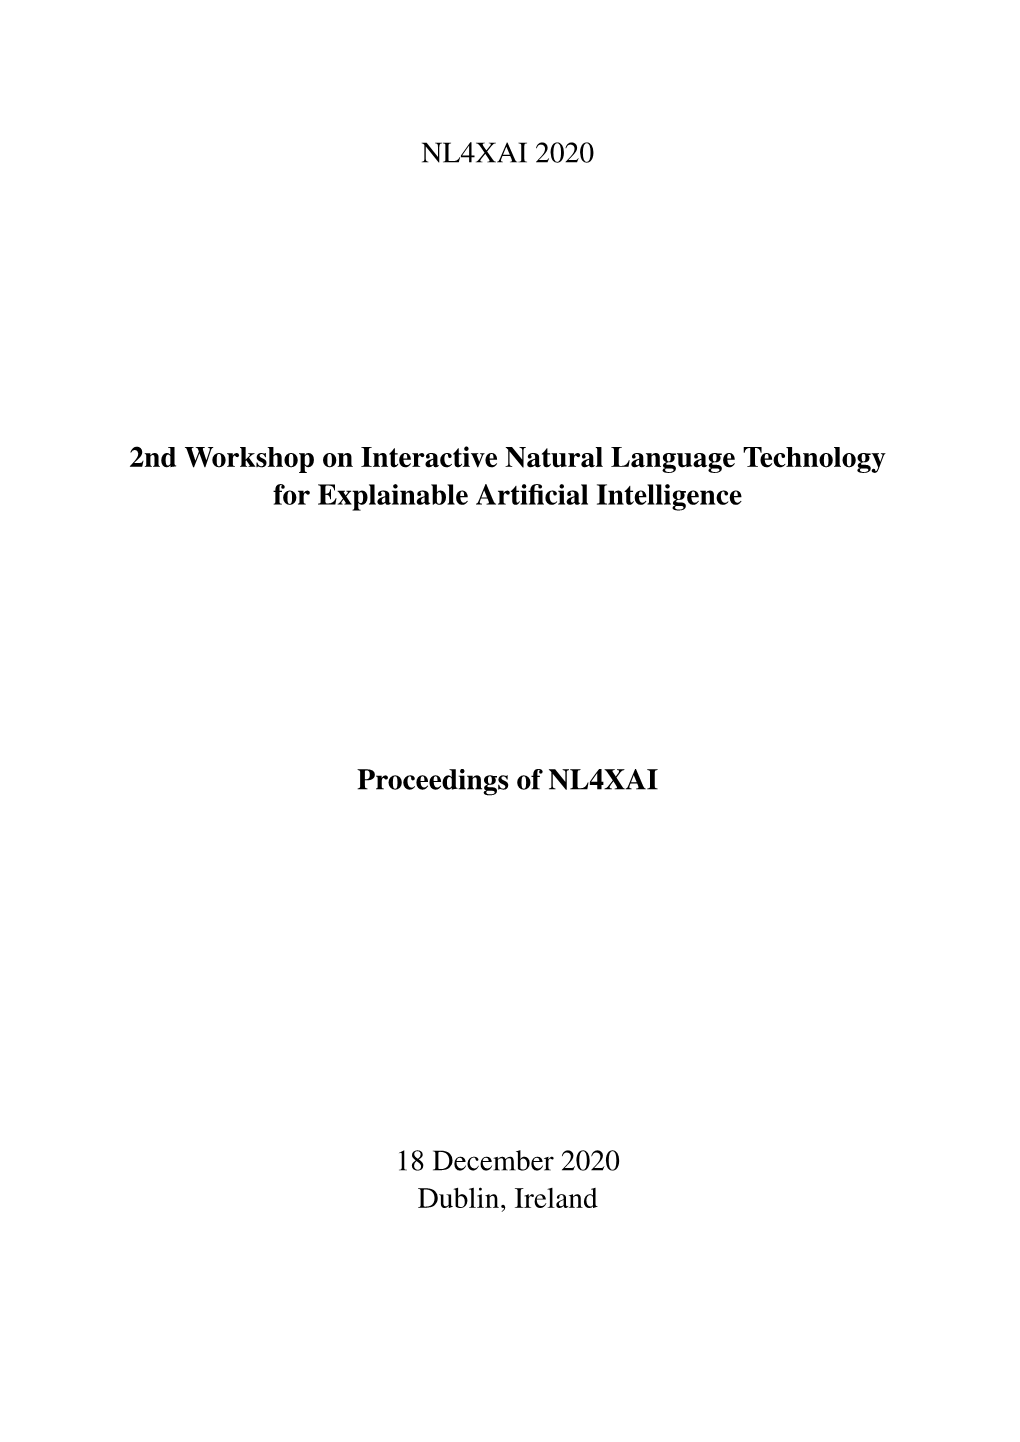 2Nd Workshop on Interactive Natural Language Technology for Explainable Artiﬁcial Intelligence